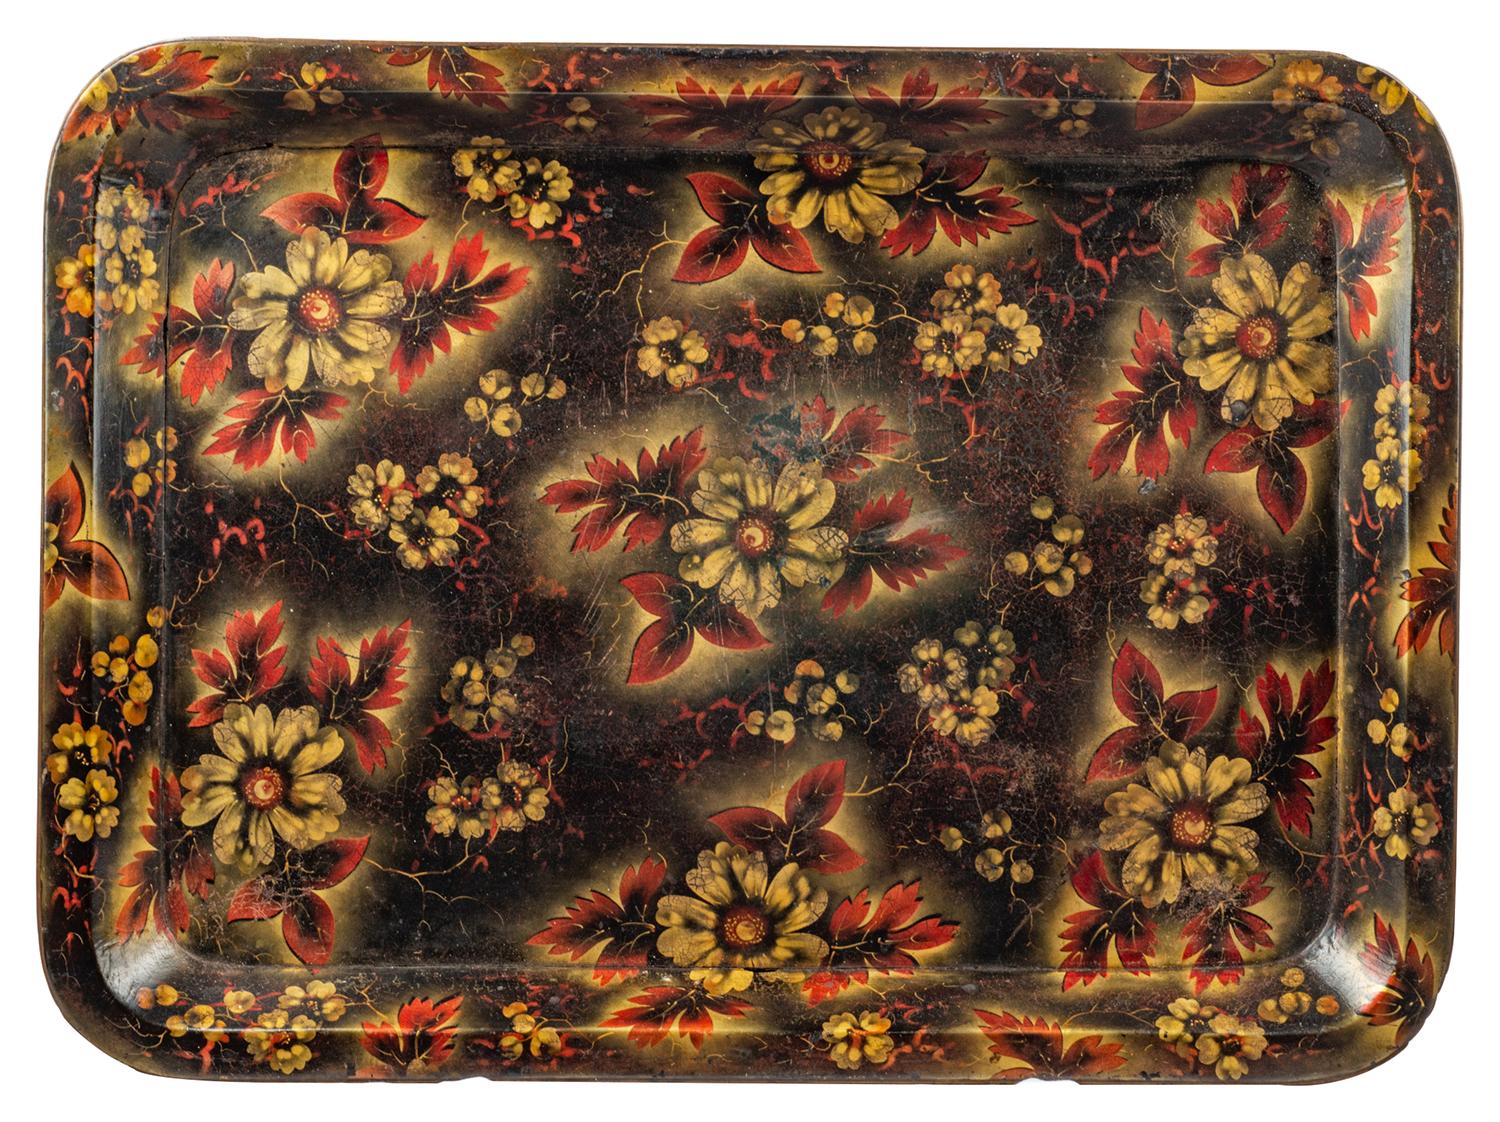 A very good quality 19th century English Regency period paper-macha tray on stand. Having wonderful red and gilded floral decoration, mounted on a later faux bamboo stand.